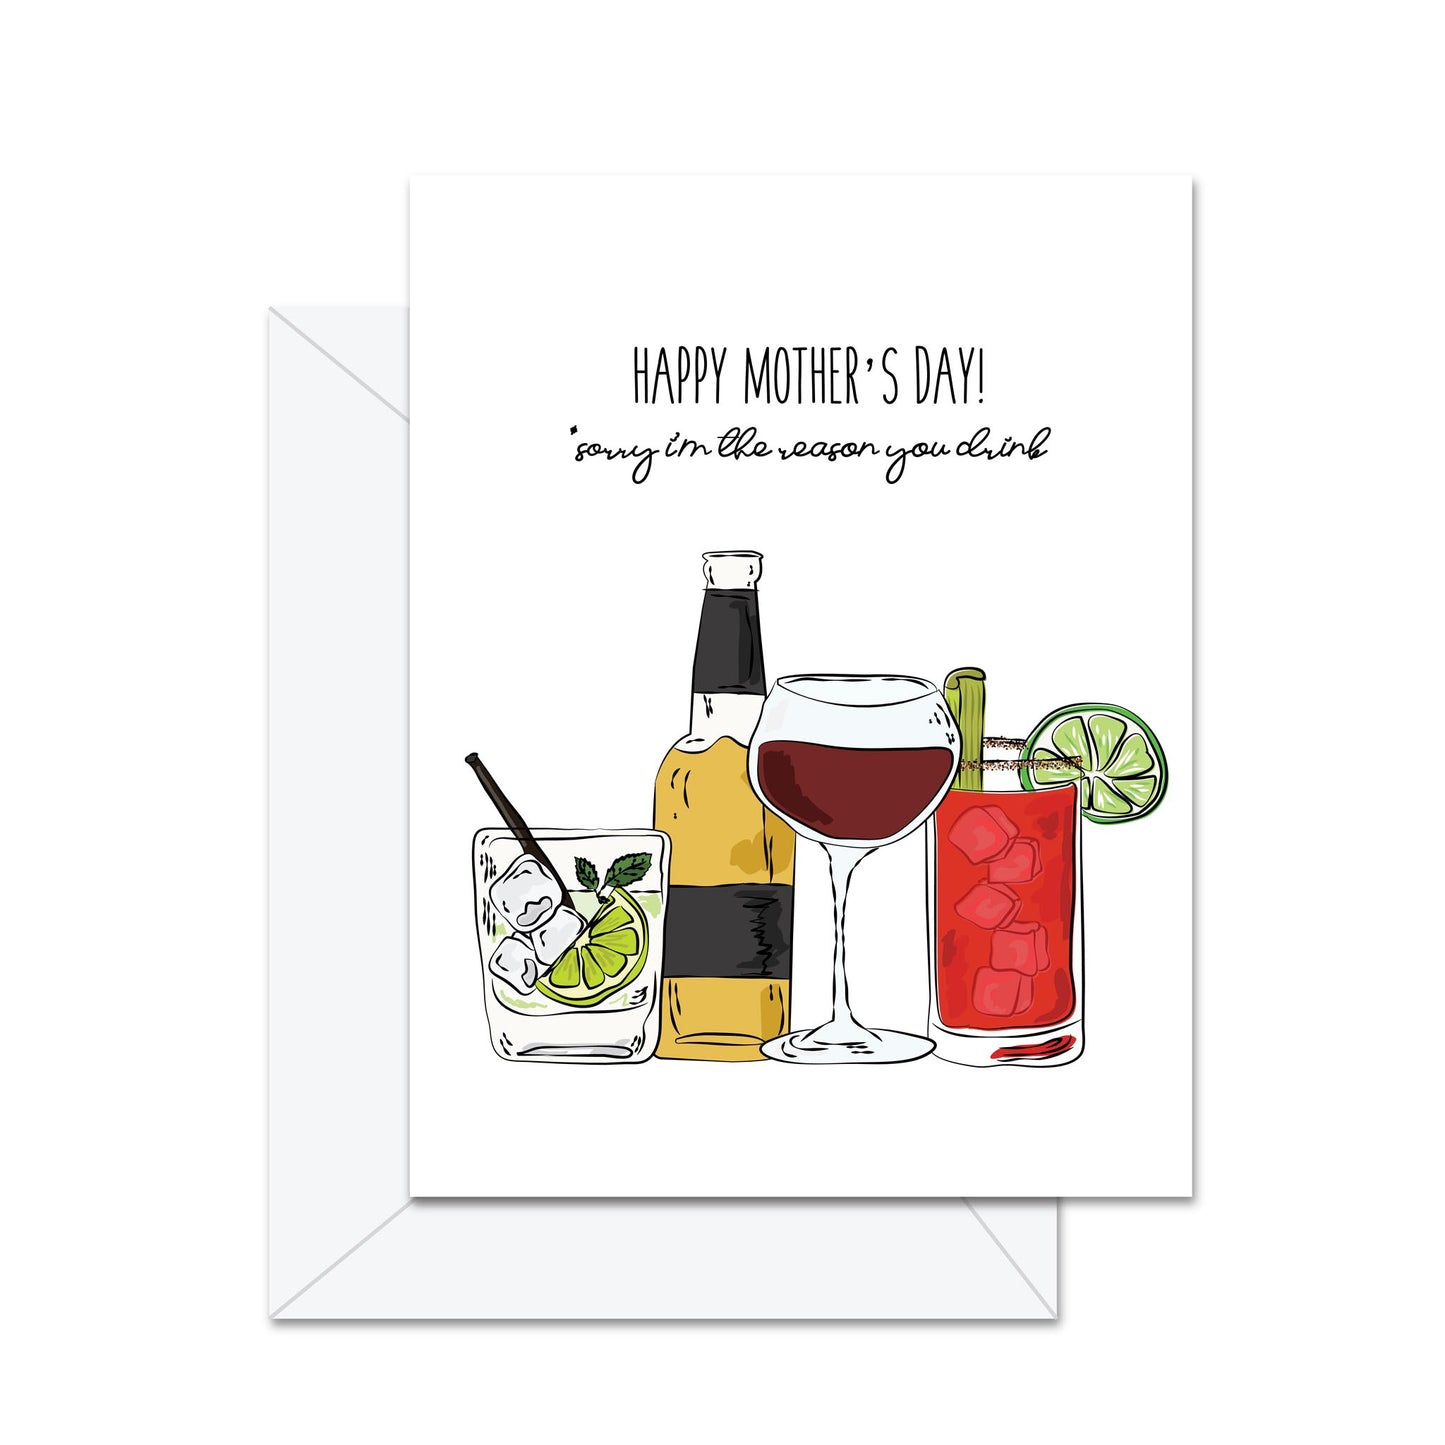 Happy Mother's Day! Sorry I Am The Reason You Drink! - Greeting Card